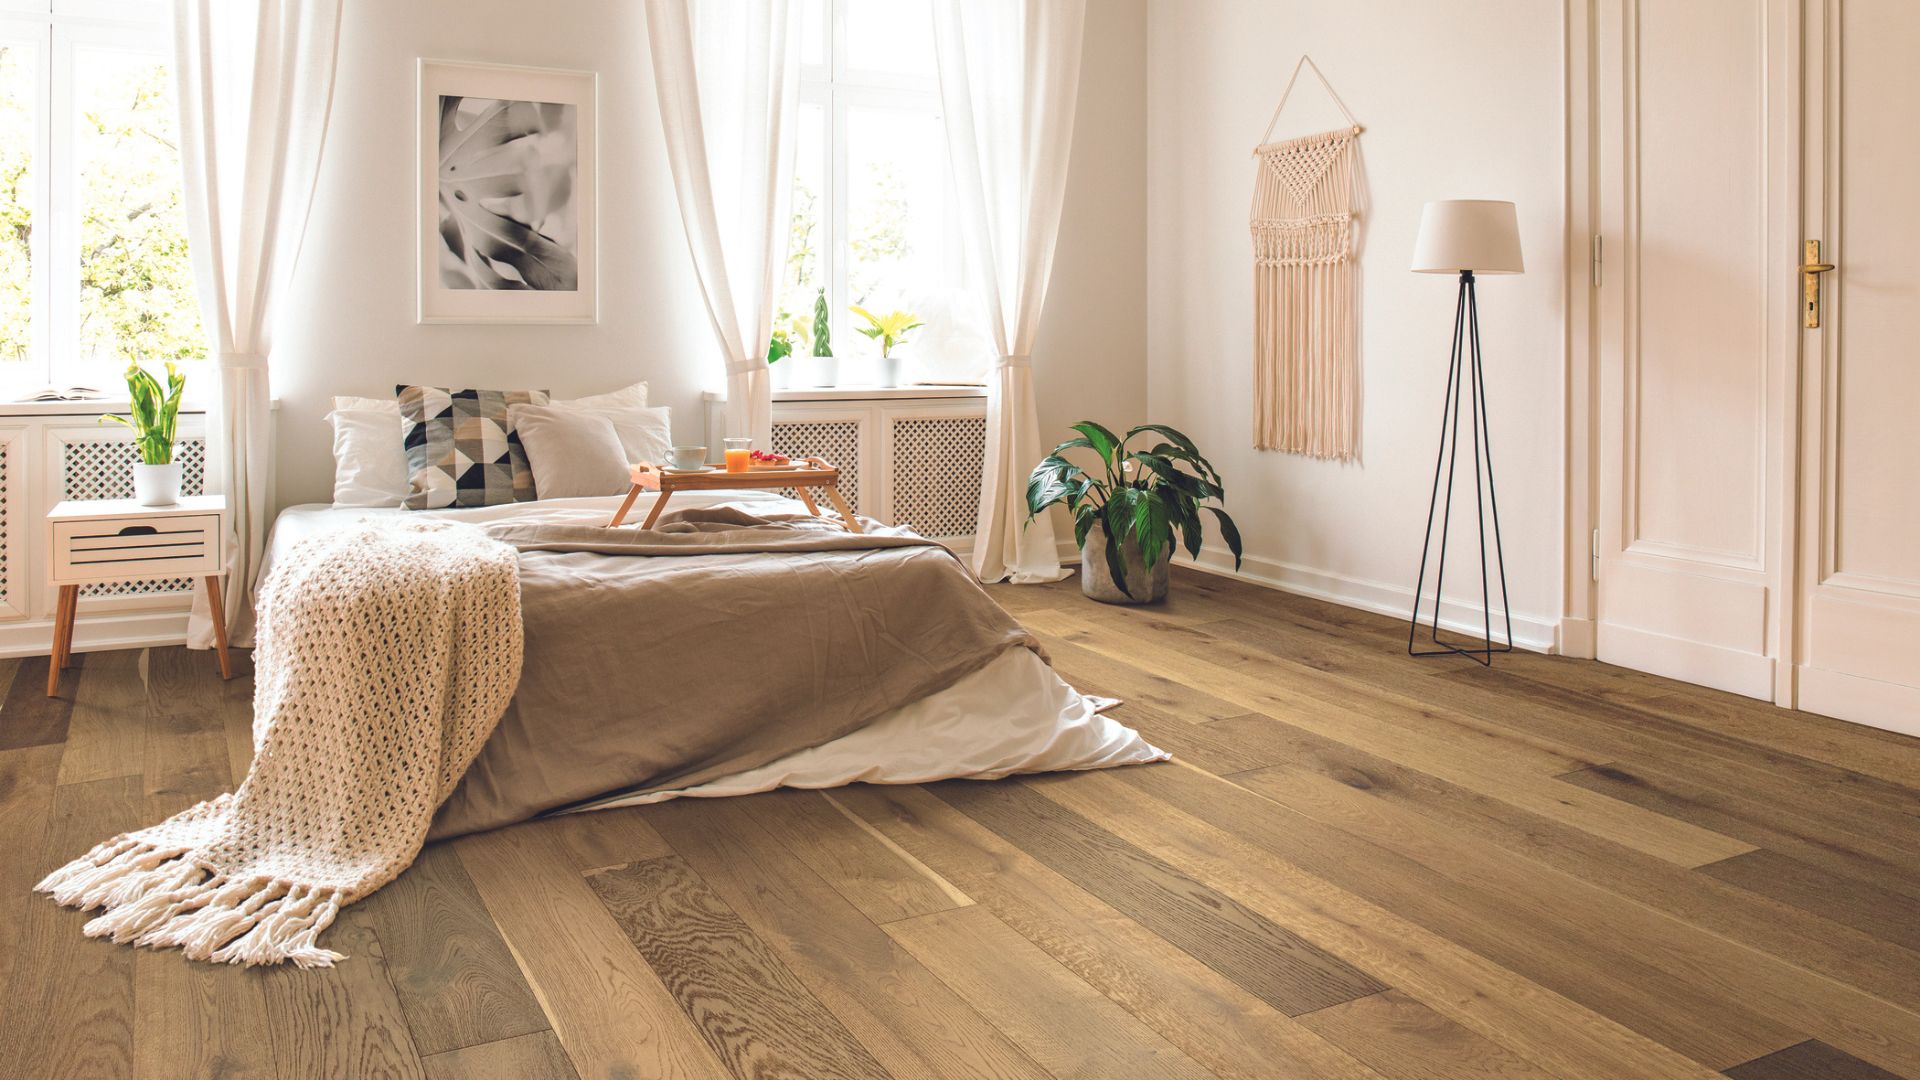 Is Laminate Flooring or Carpet Better for a Bedroom?